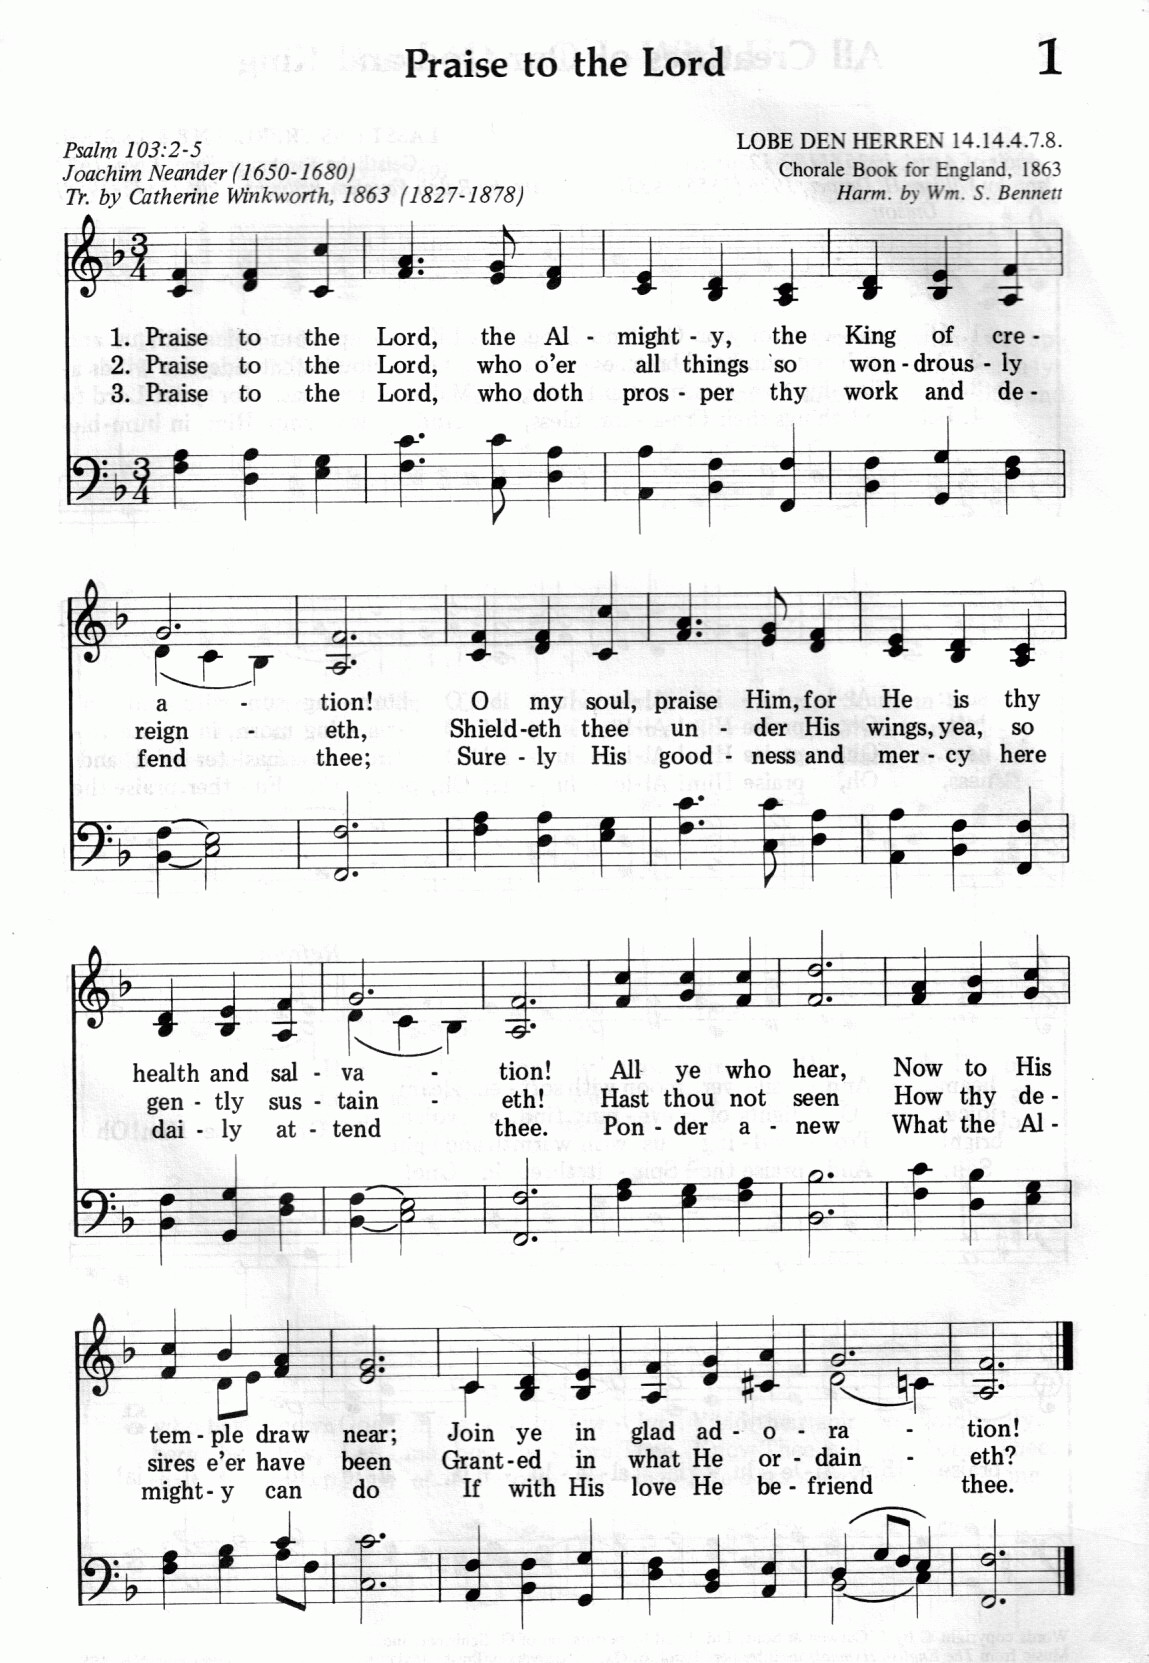 001.Praise to the Lord-695HYMN